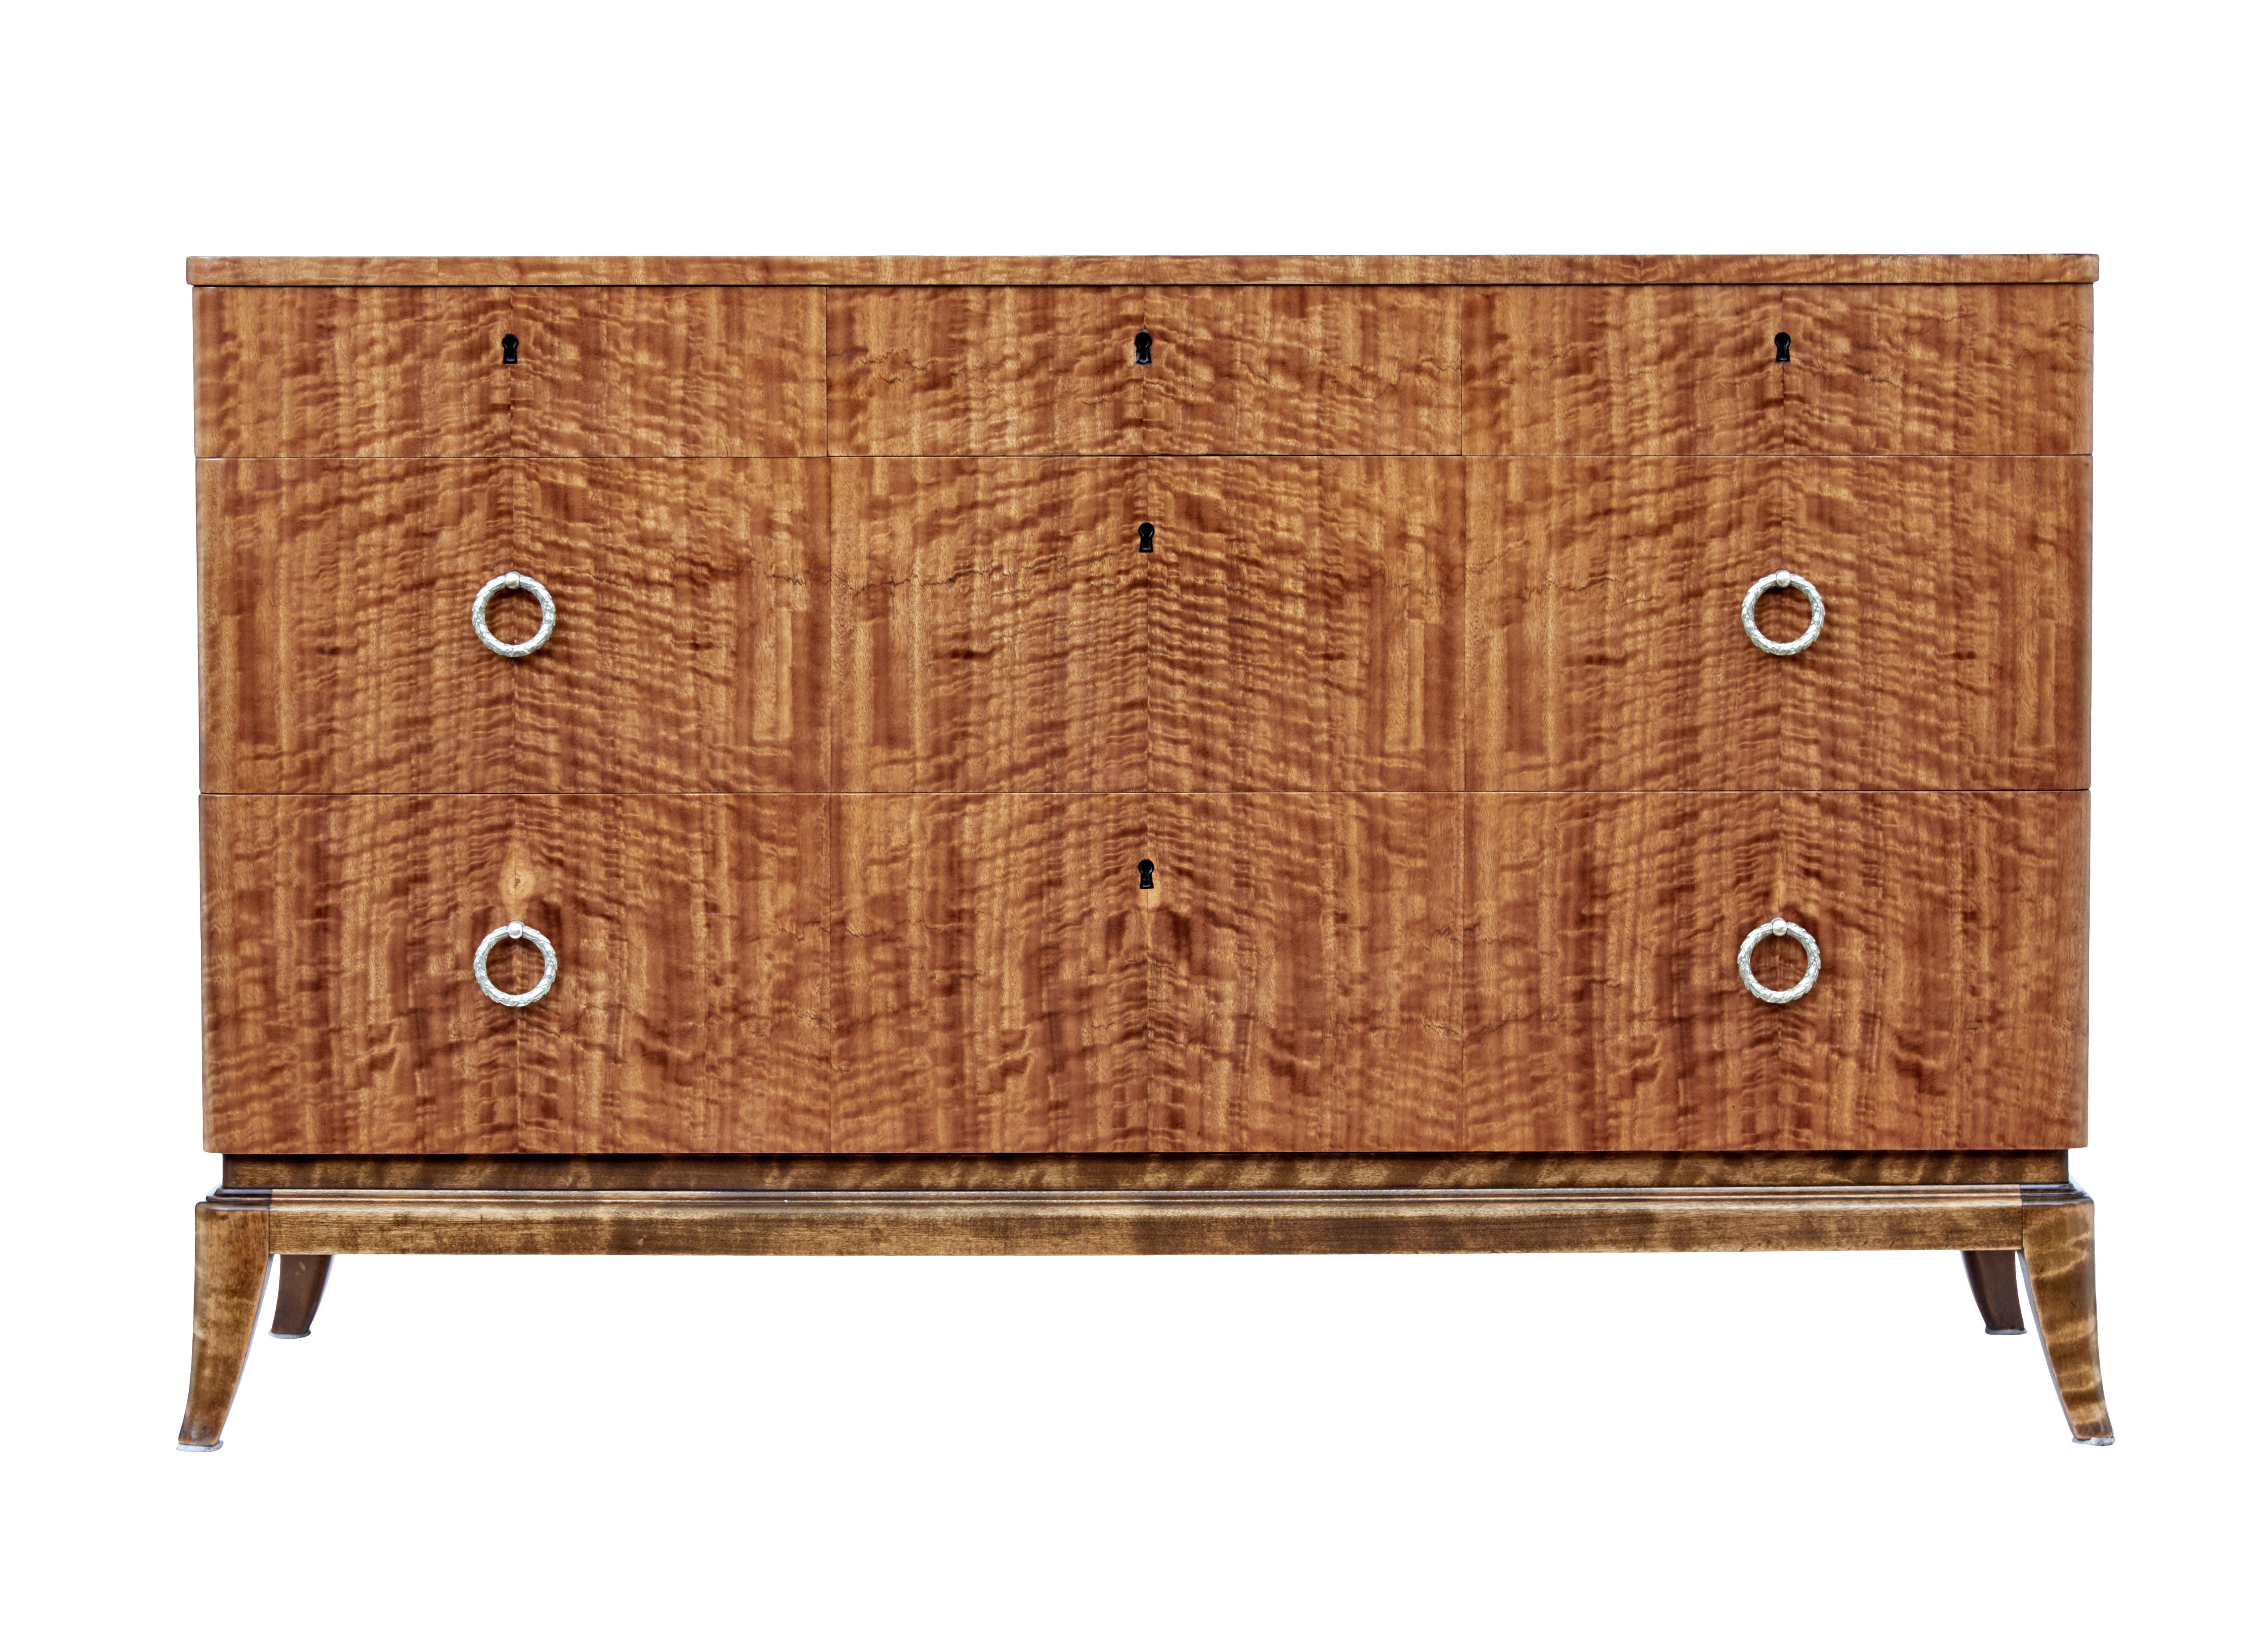 Mid-20th century Scandinavian satinwood chest of drawers, circa 1960.

Excellent quality Swedish chest of drawers, veneered in striking satinwood. Fitted with 3 graduating drawers, top drawer opens on the key, other drawers fitted with brass